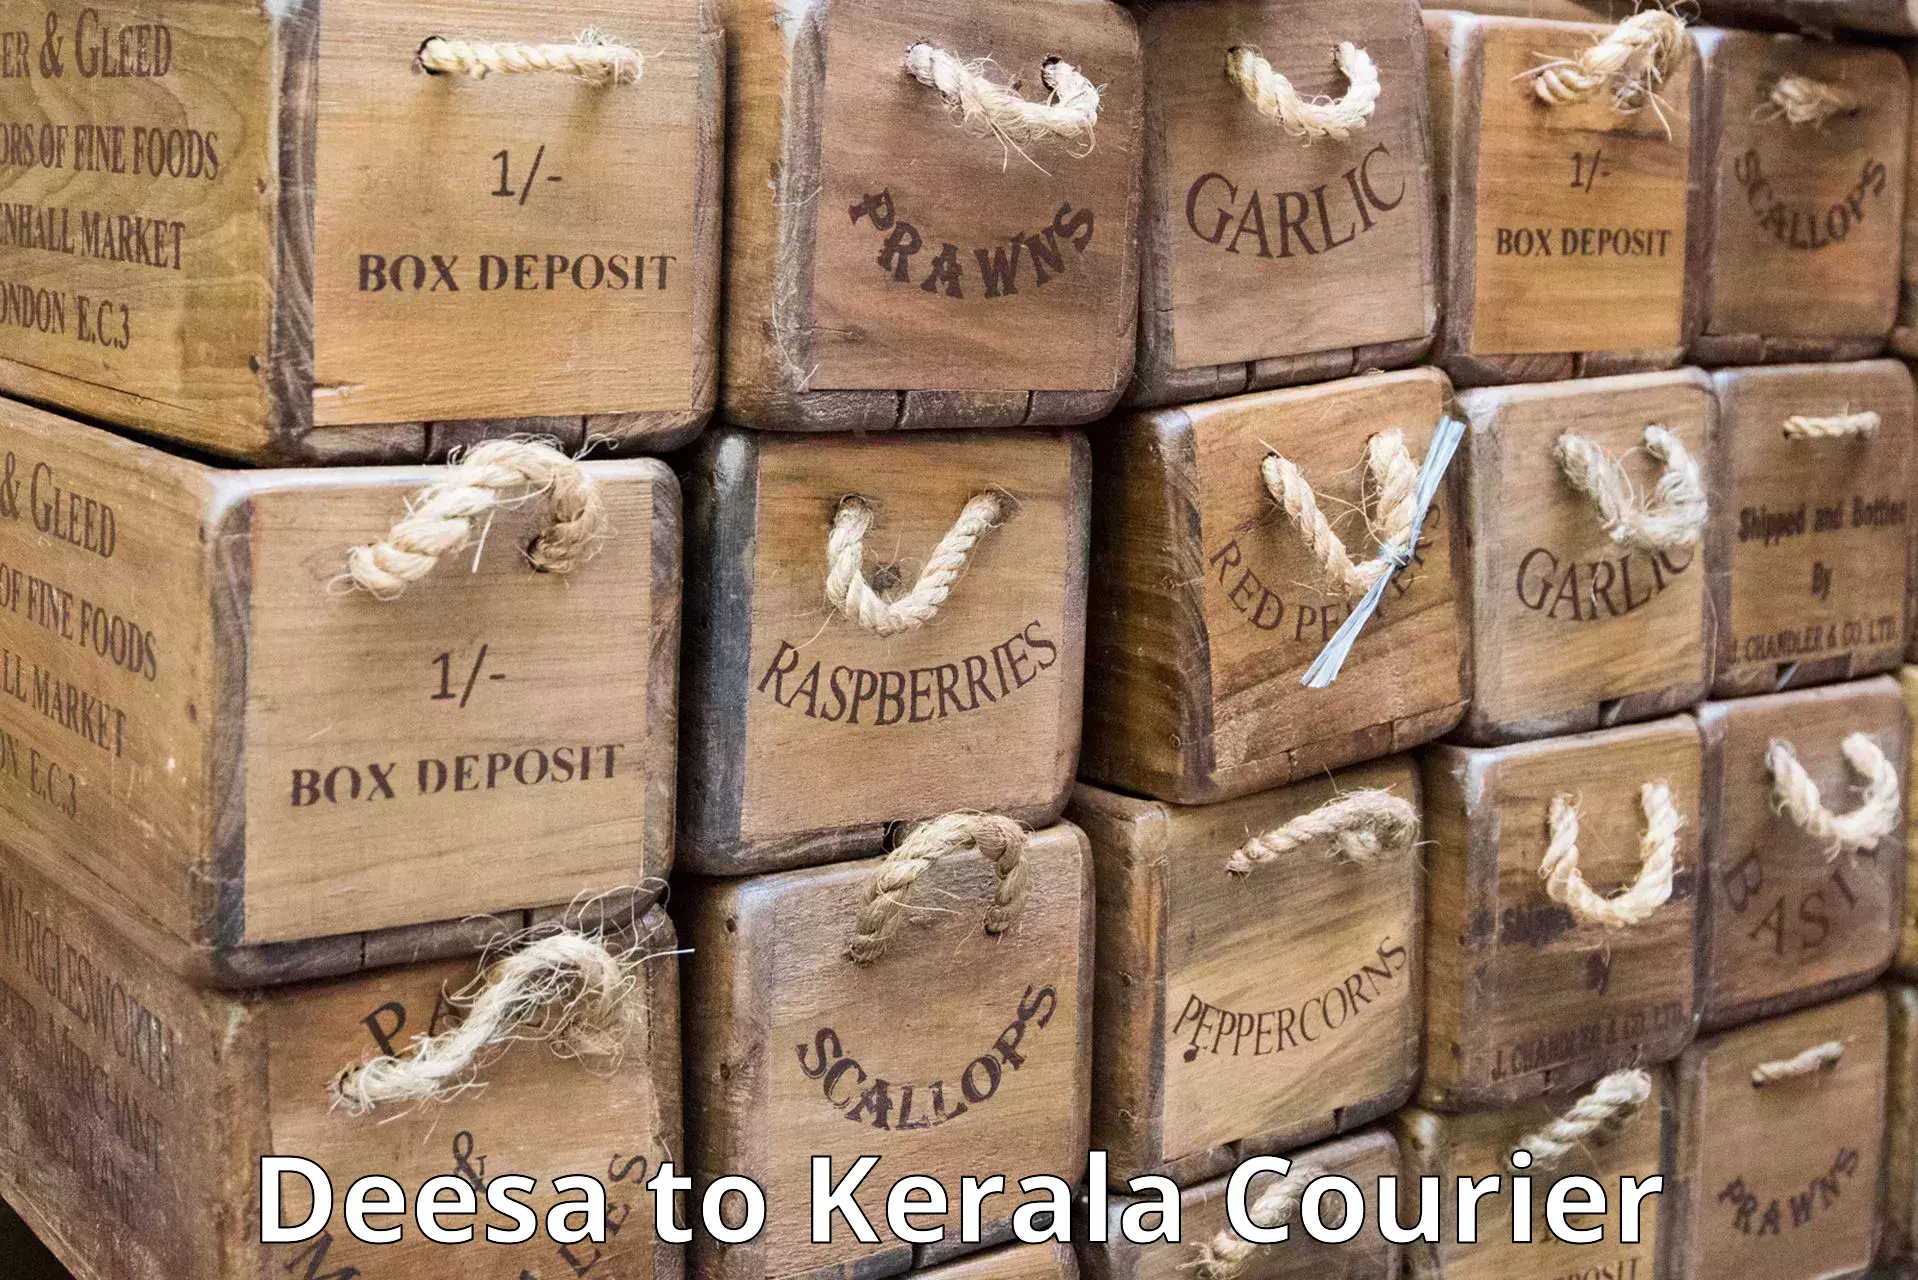 Express delivery solutions Deesa to Kottayam